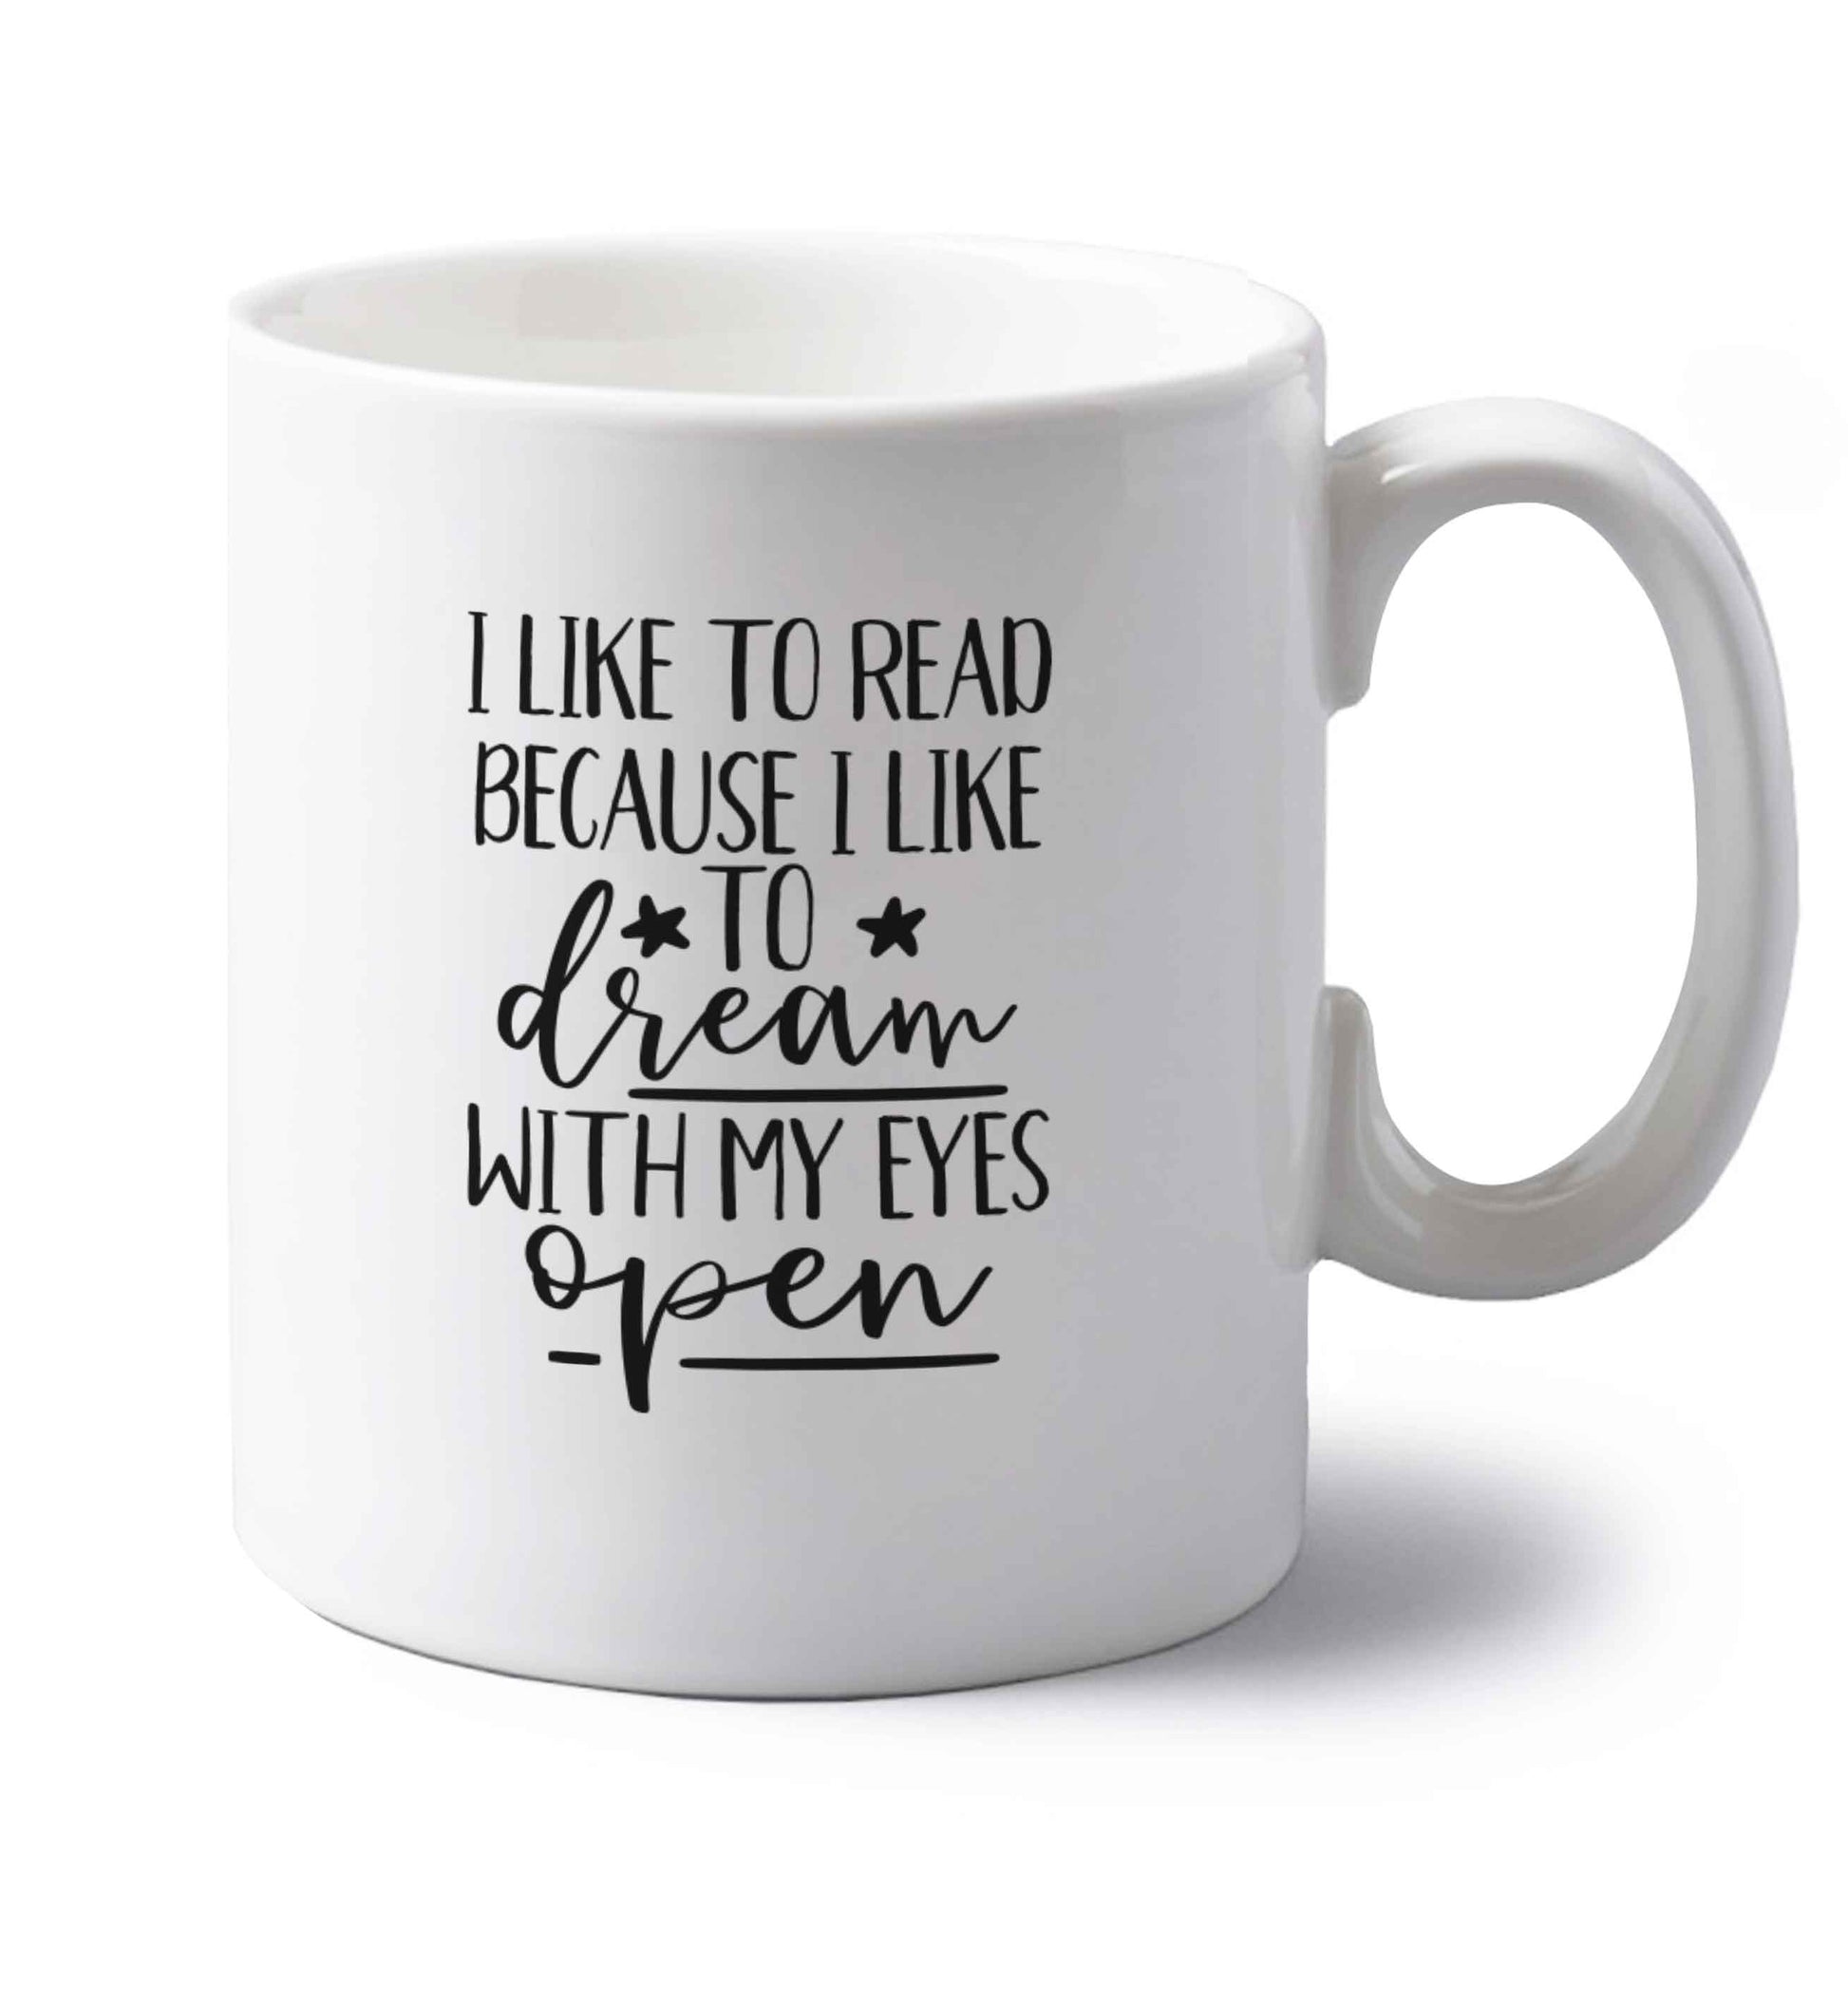 I like to read because I like to dream with my eyes open left handed white ceramic mug 